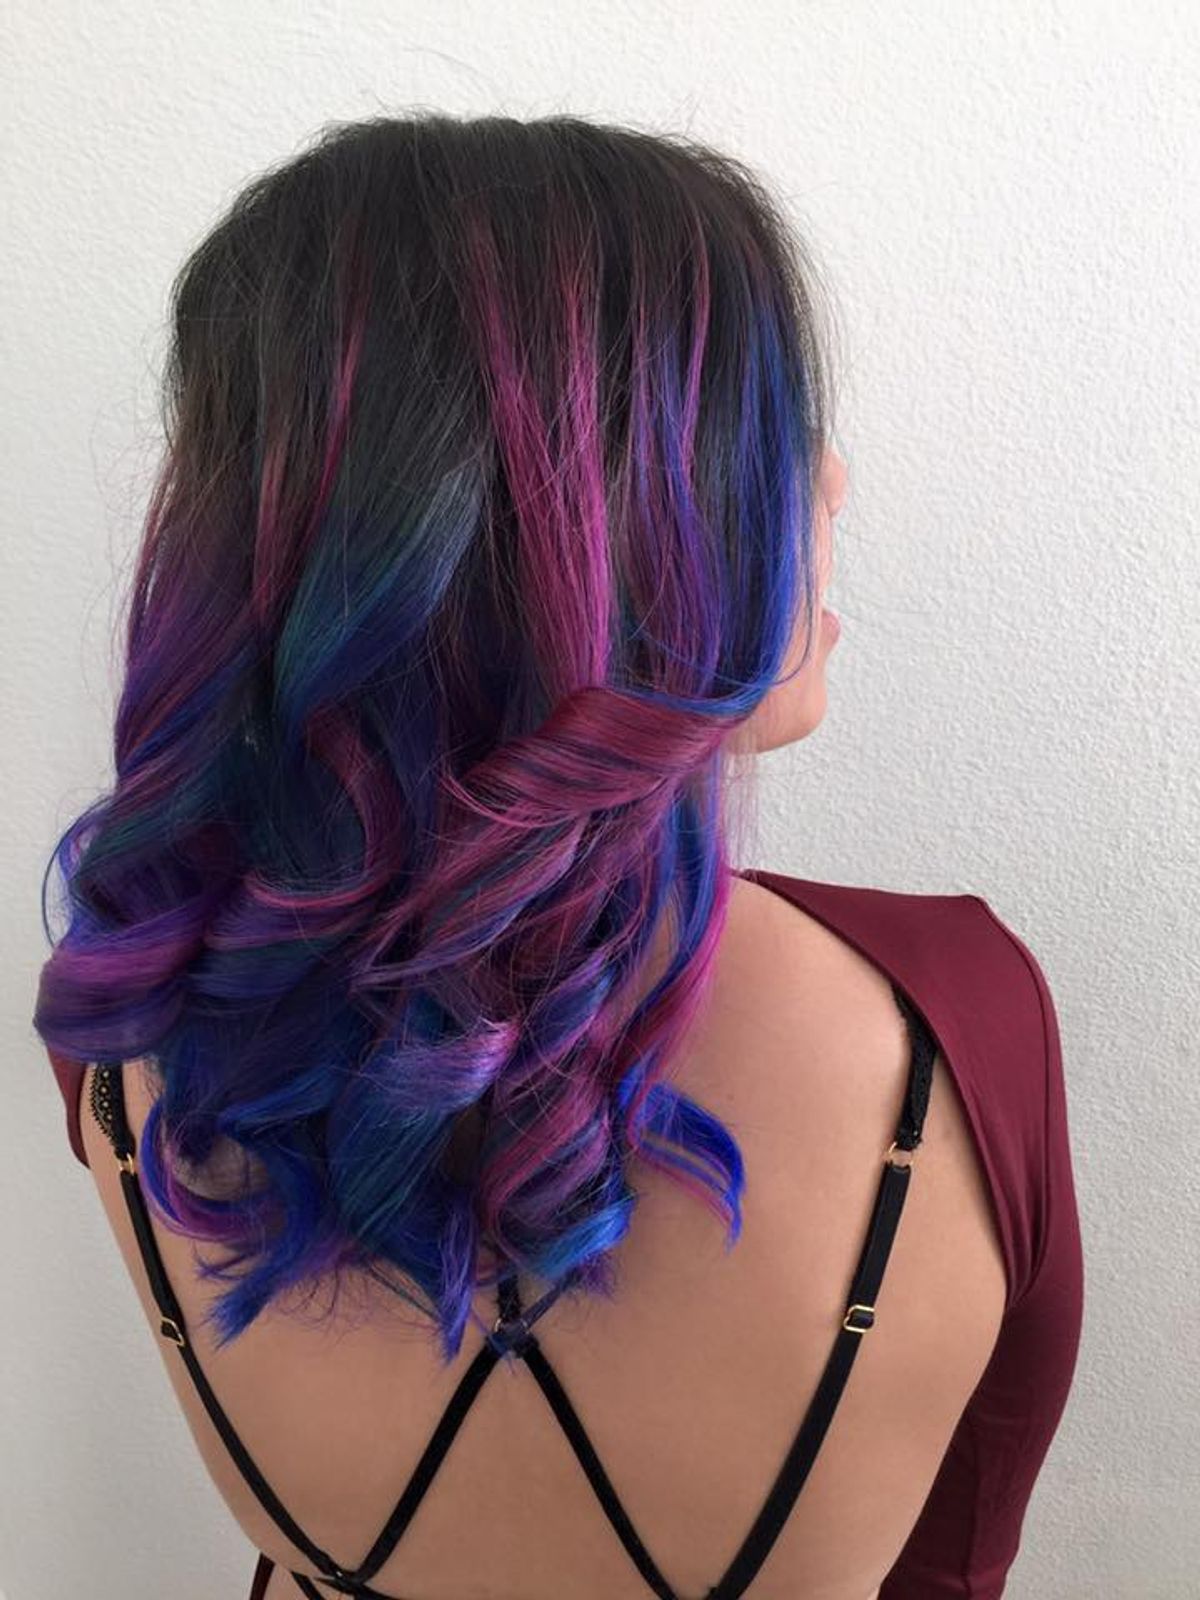 What I Wish I Knew Before Dying My Hair (An Unusual Color)